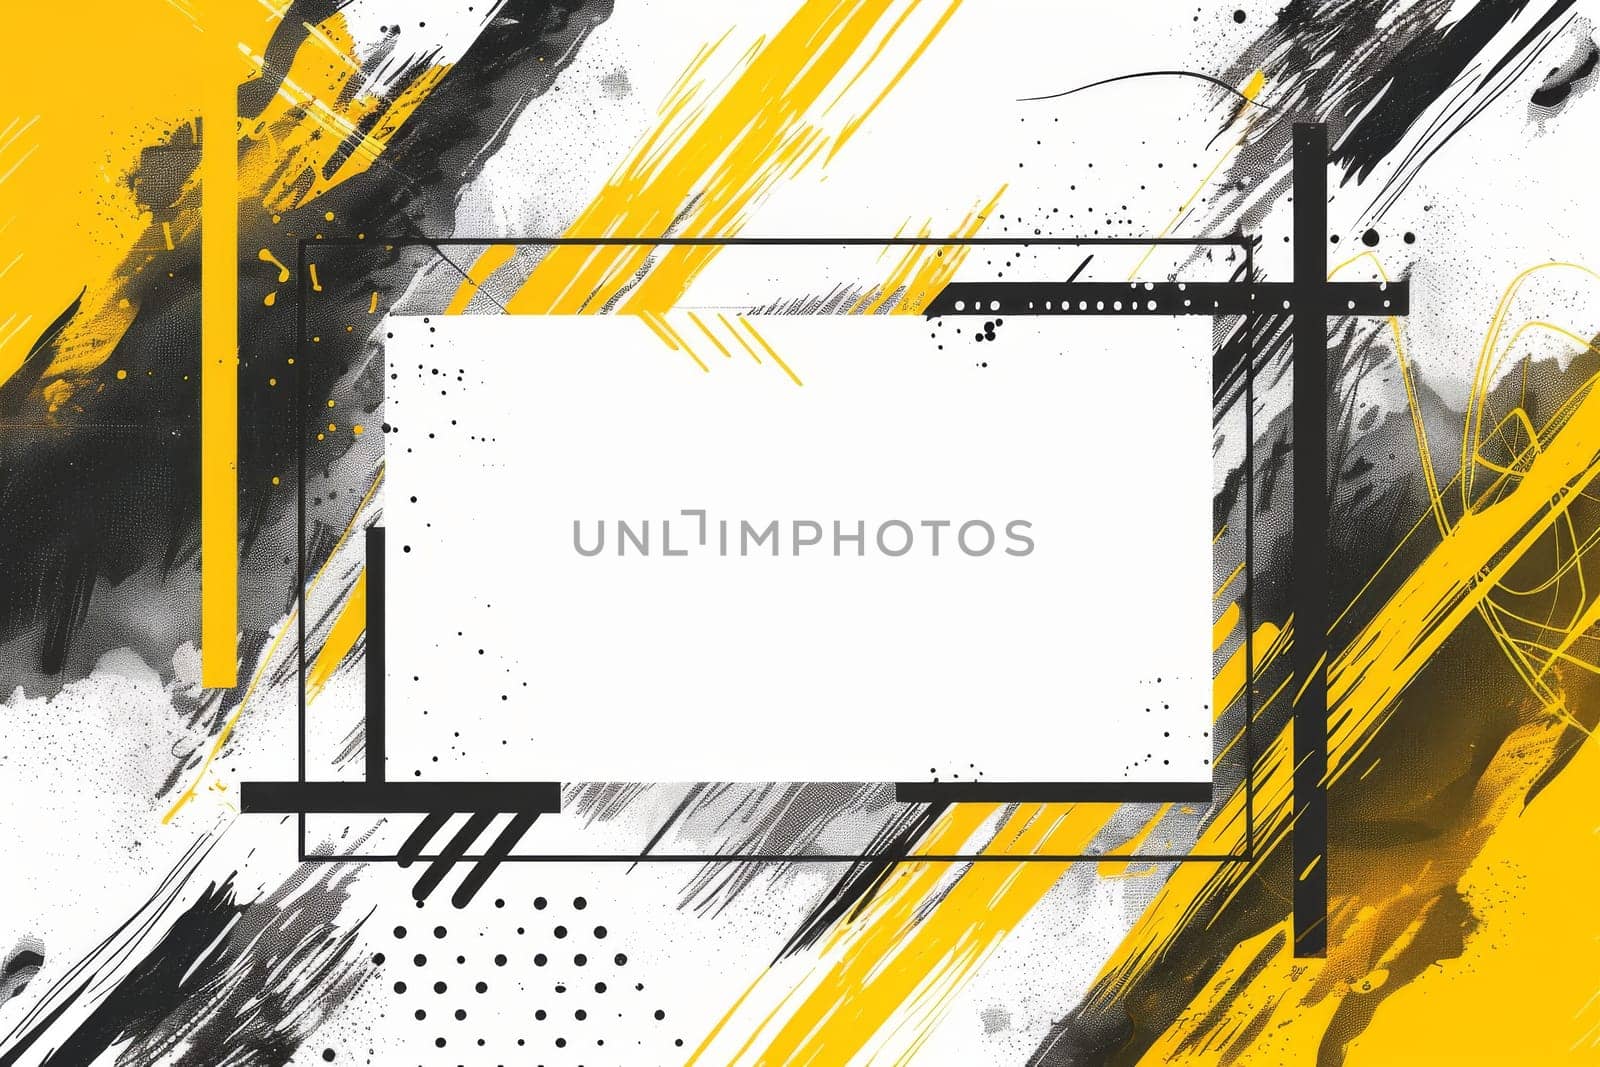 A black and white background with a white frame and a black square in the middle. The image has a modern and abstract feel to it